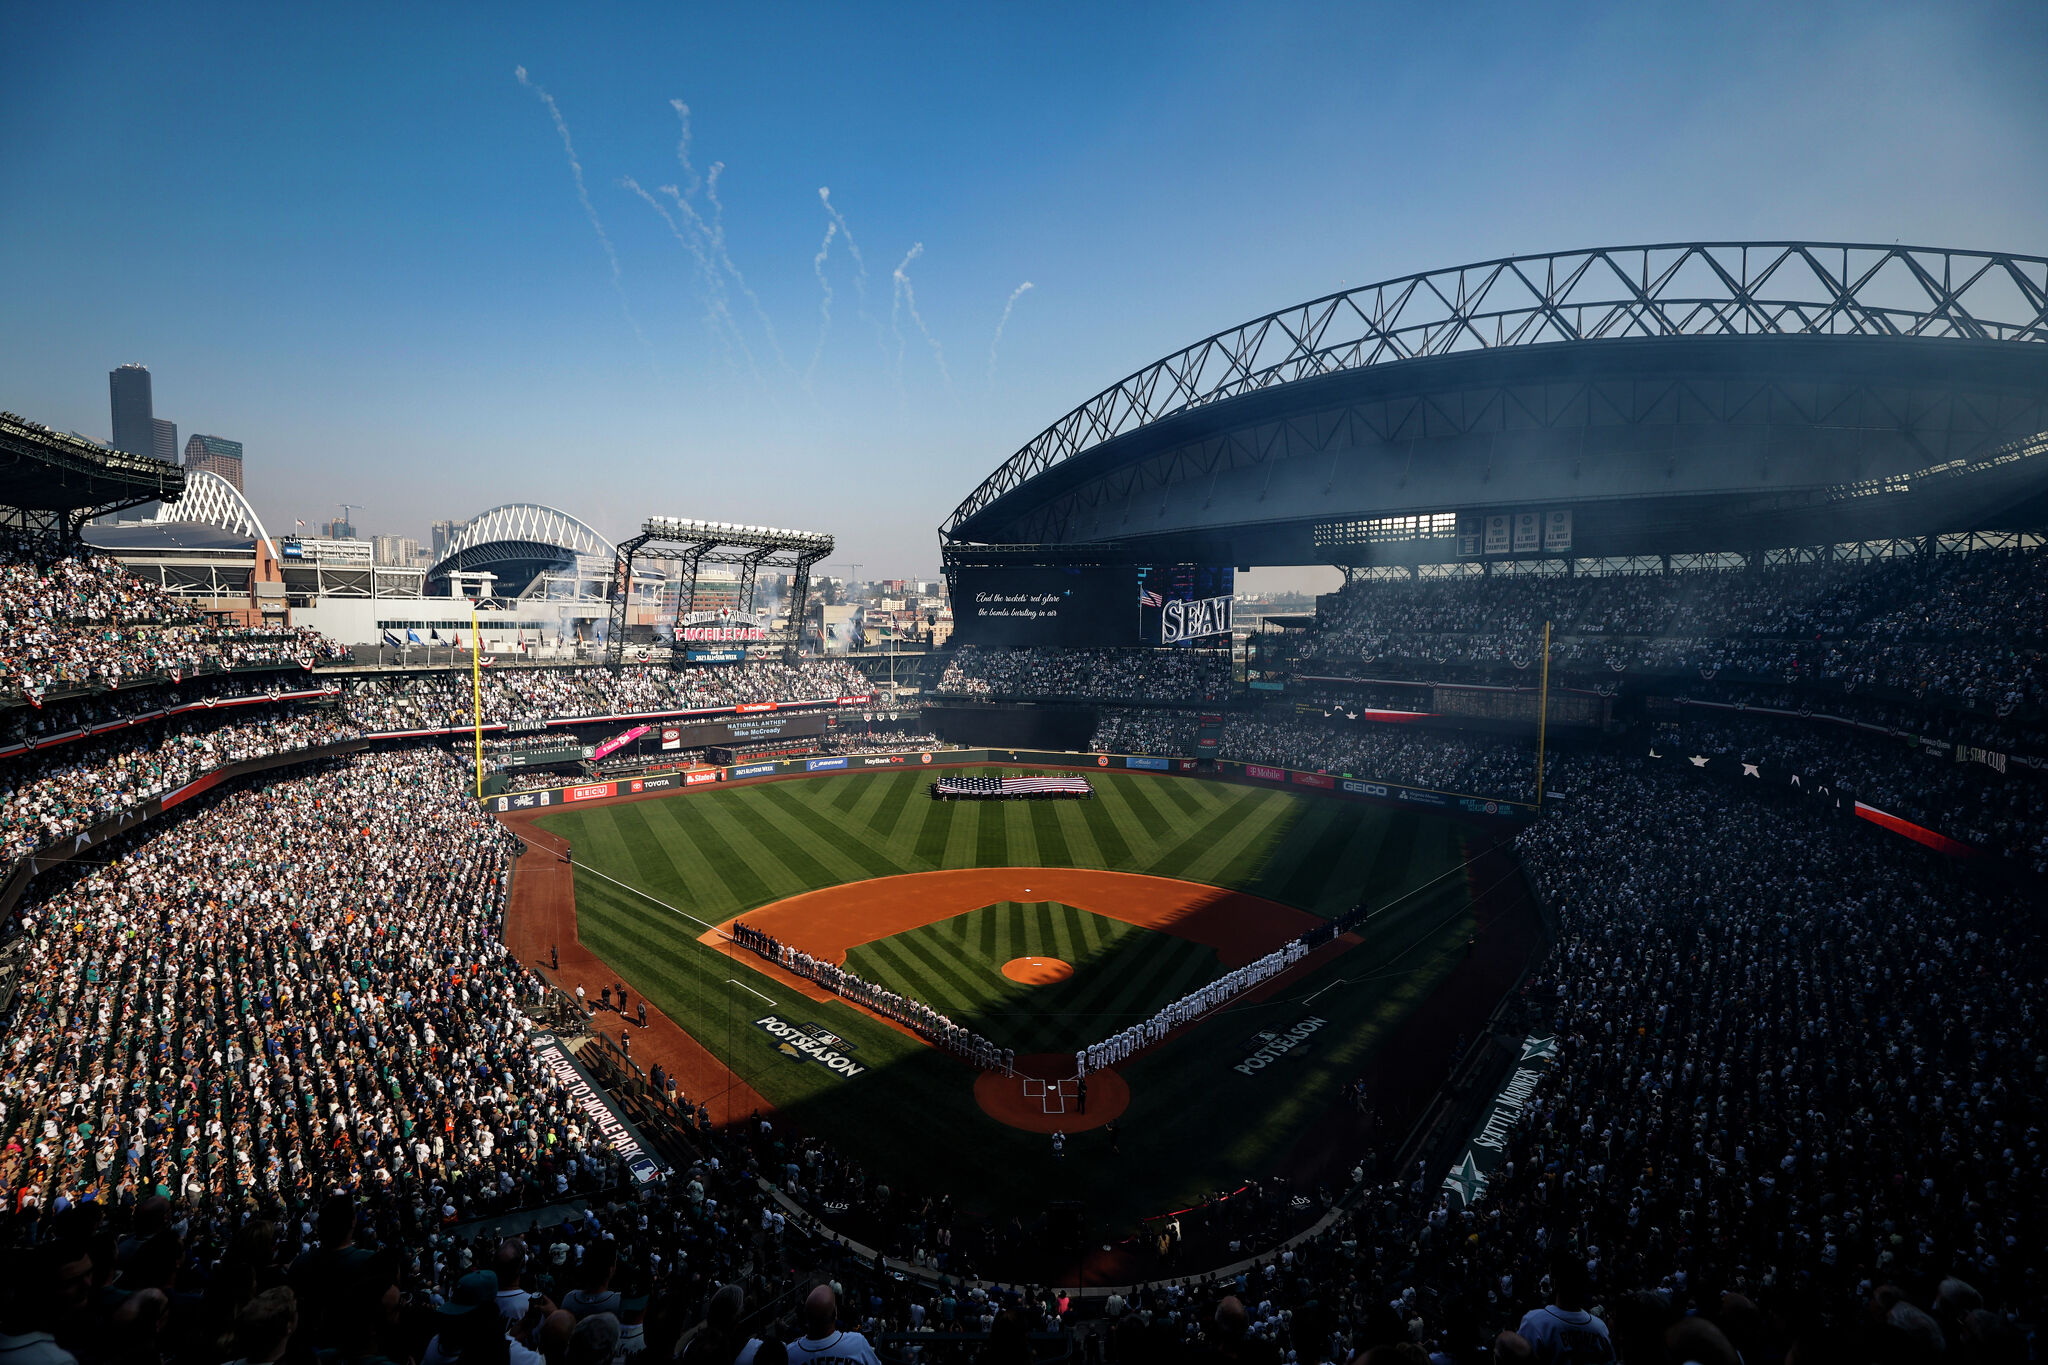 Houston Astros already lead Seattle Mariners… in retractable roof usage